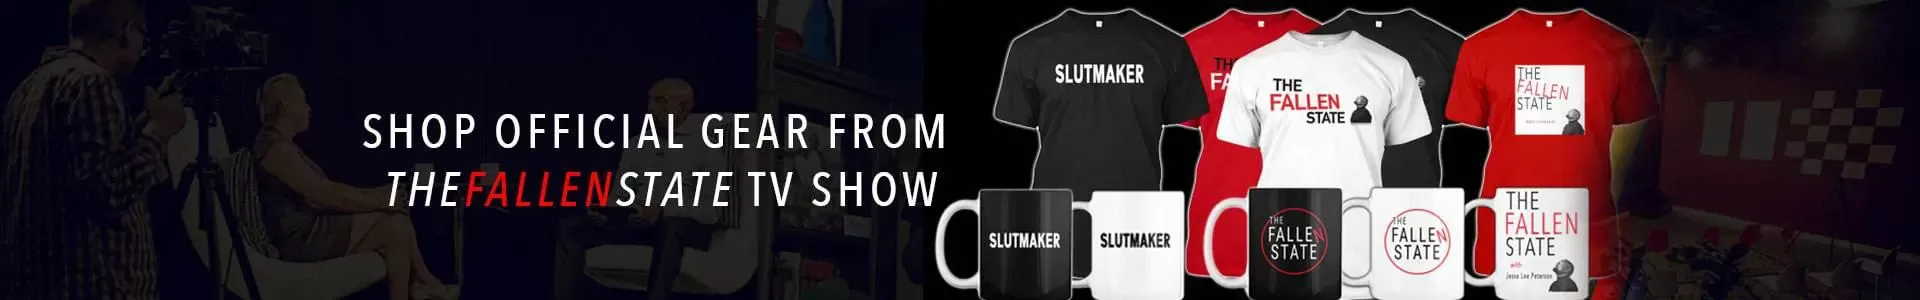 Shop official gear from the Fallen State Tv Show